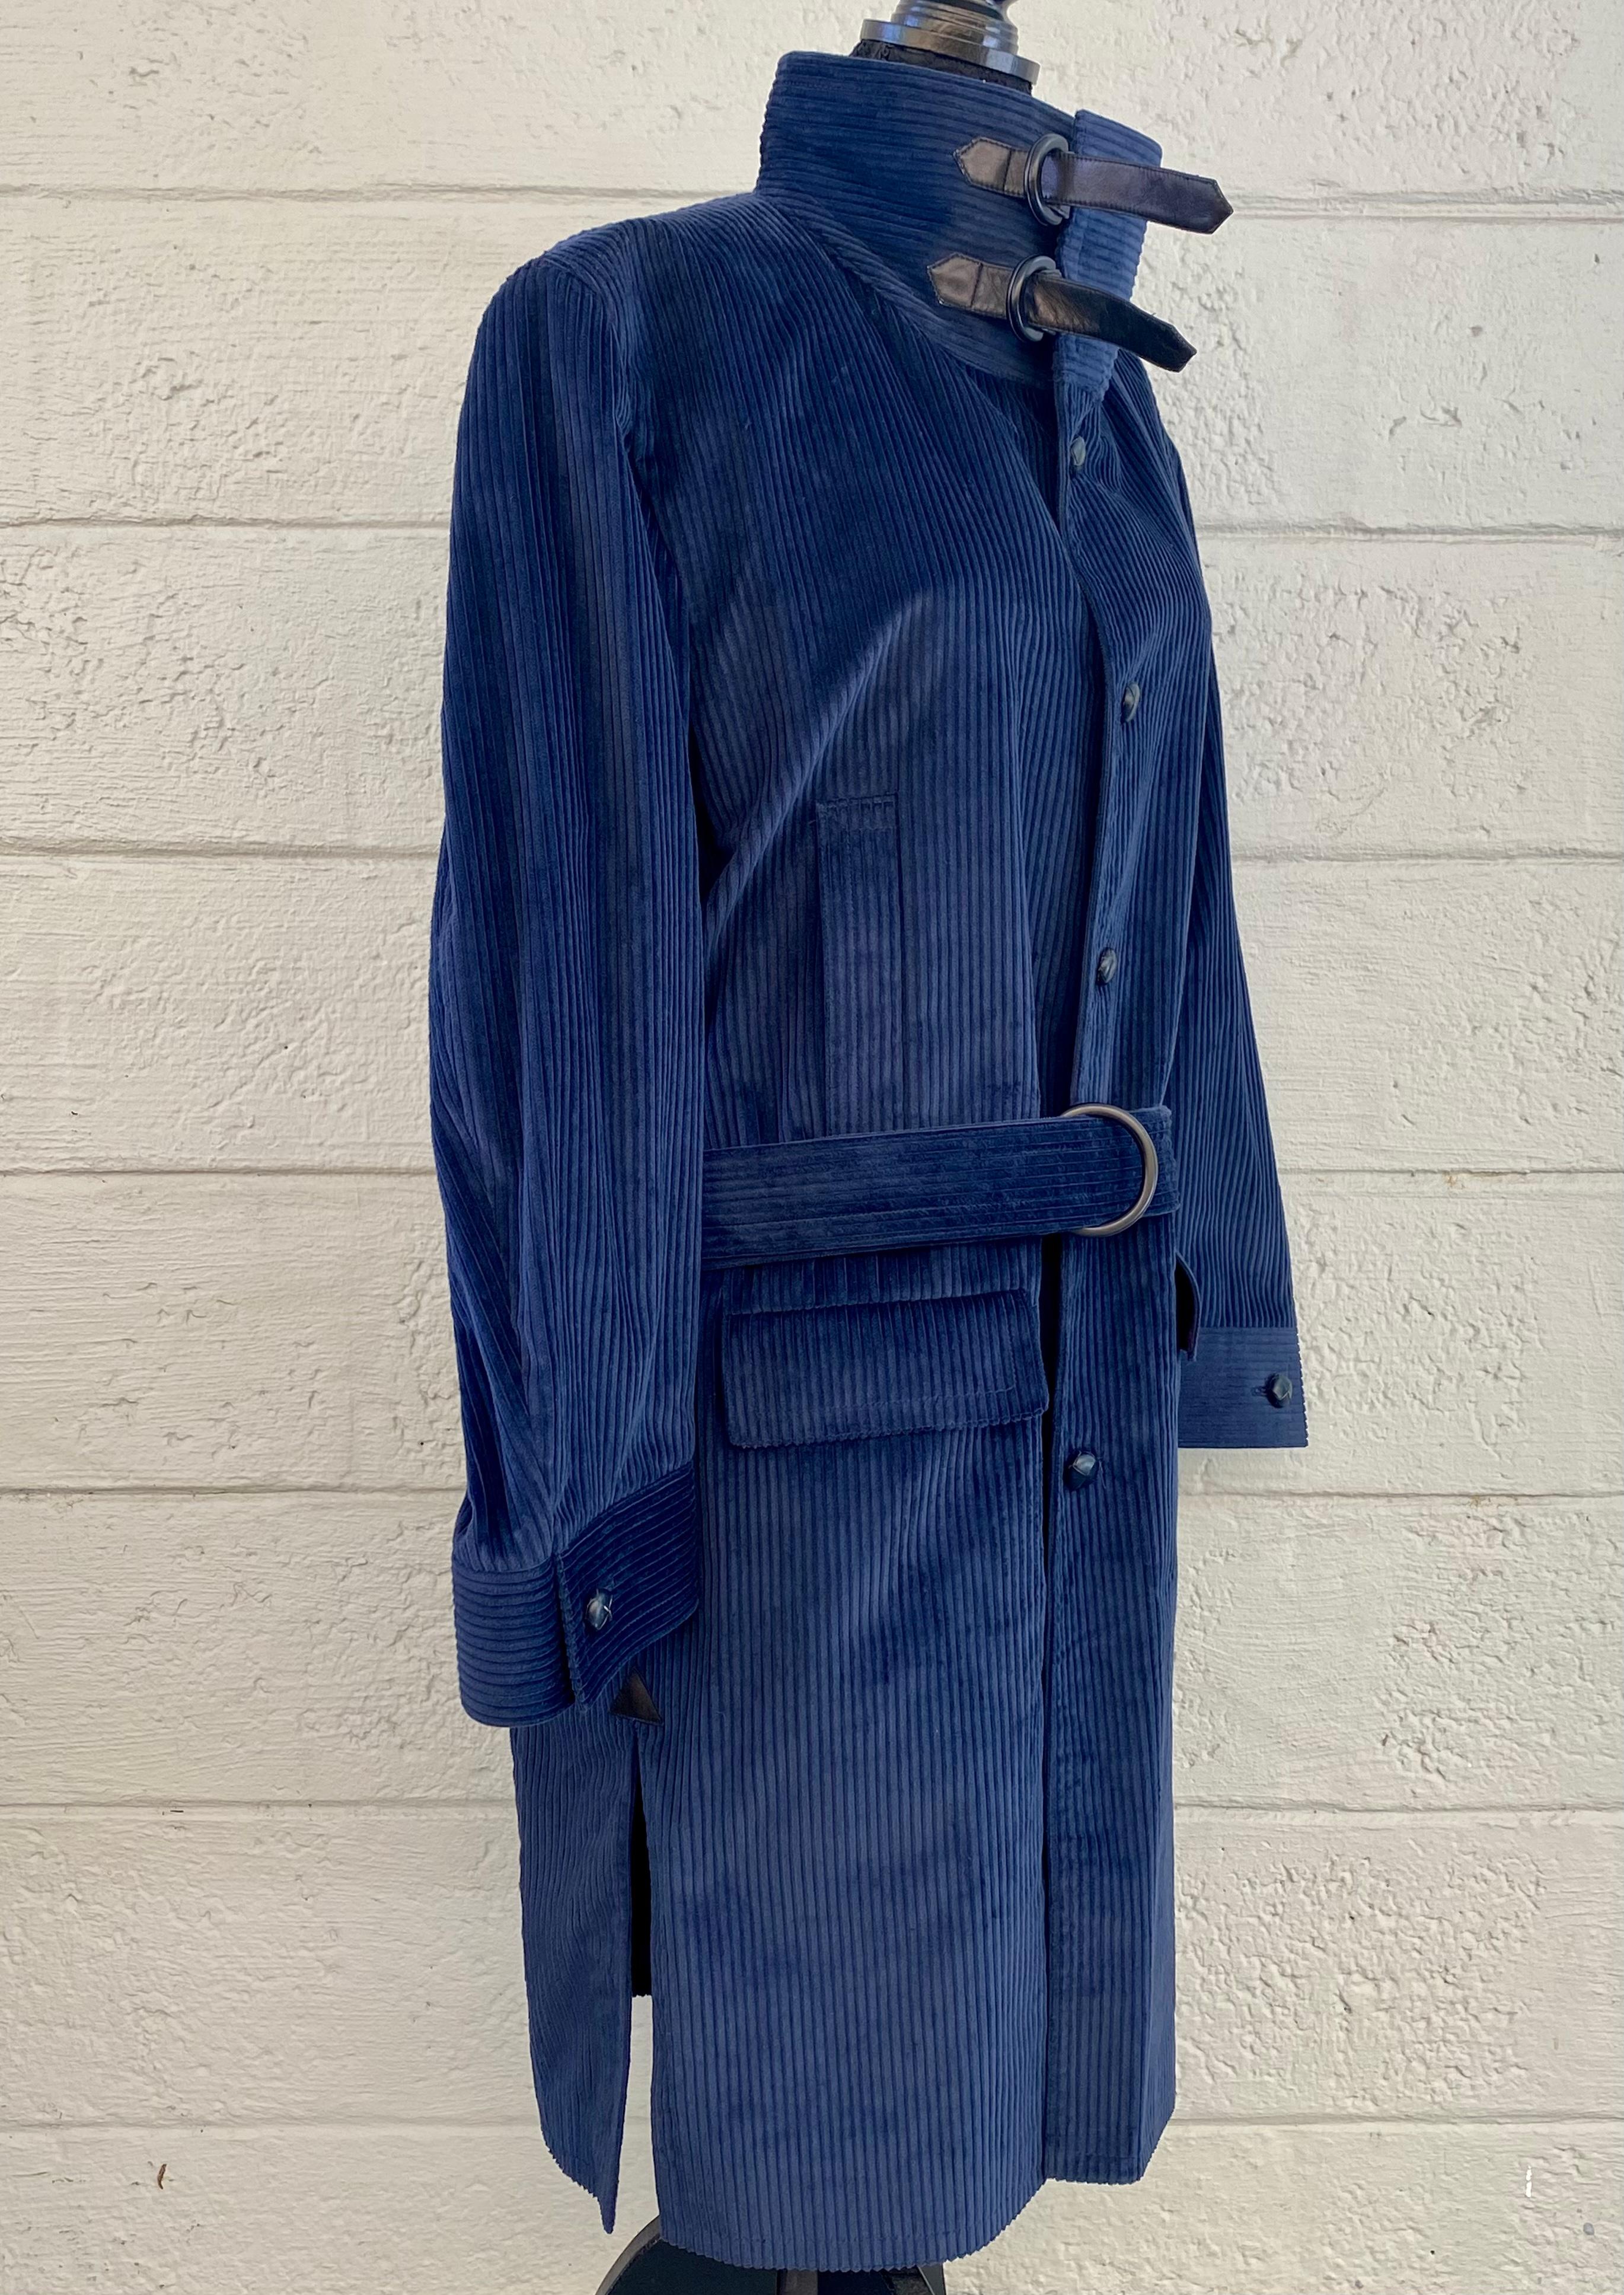 Beautiful vintage circa 1980 Pierre Cardin Boutique classic trench coat. Made in France. Navy blue corduroy features the traditional storm flap yolk, tie waist, and large slit in the back. This contrasts with the contemporary styles of the